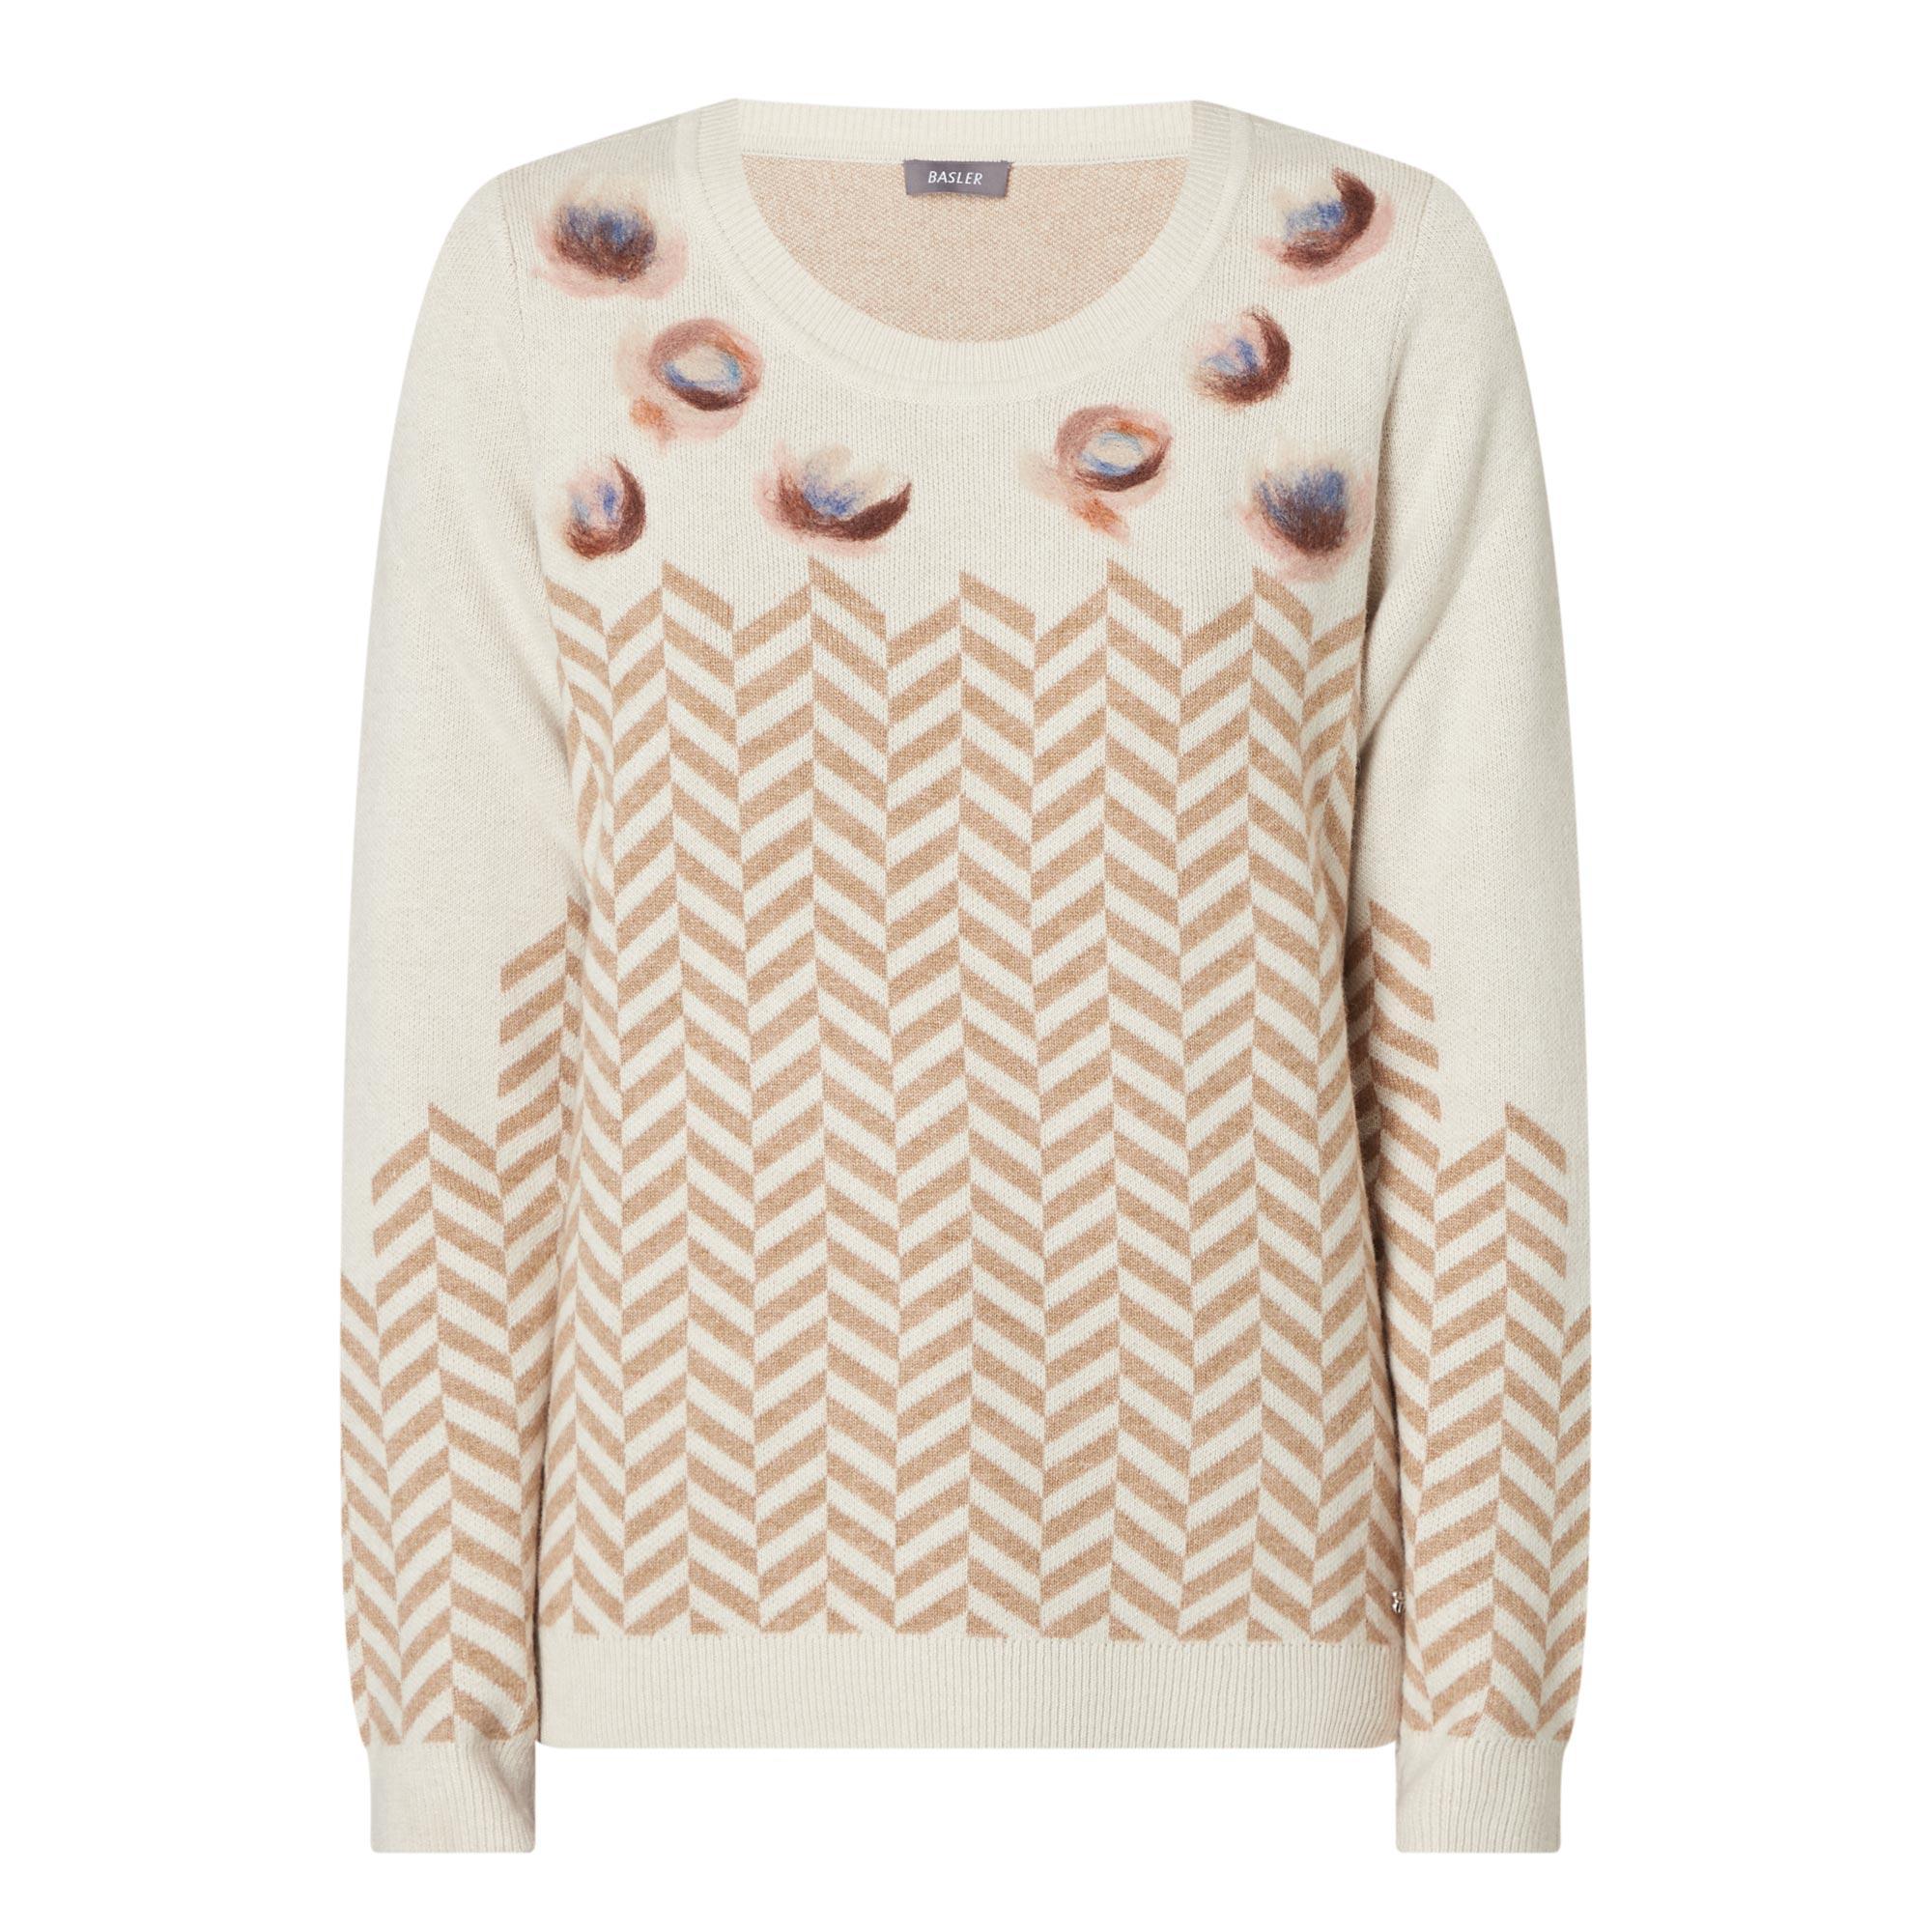 Patter Sweater